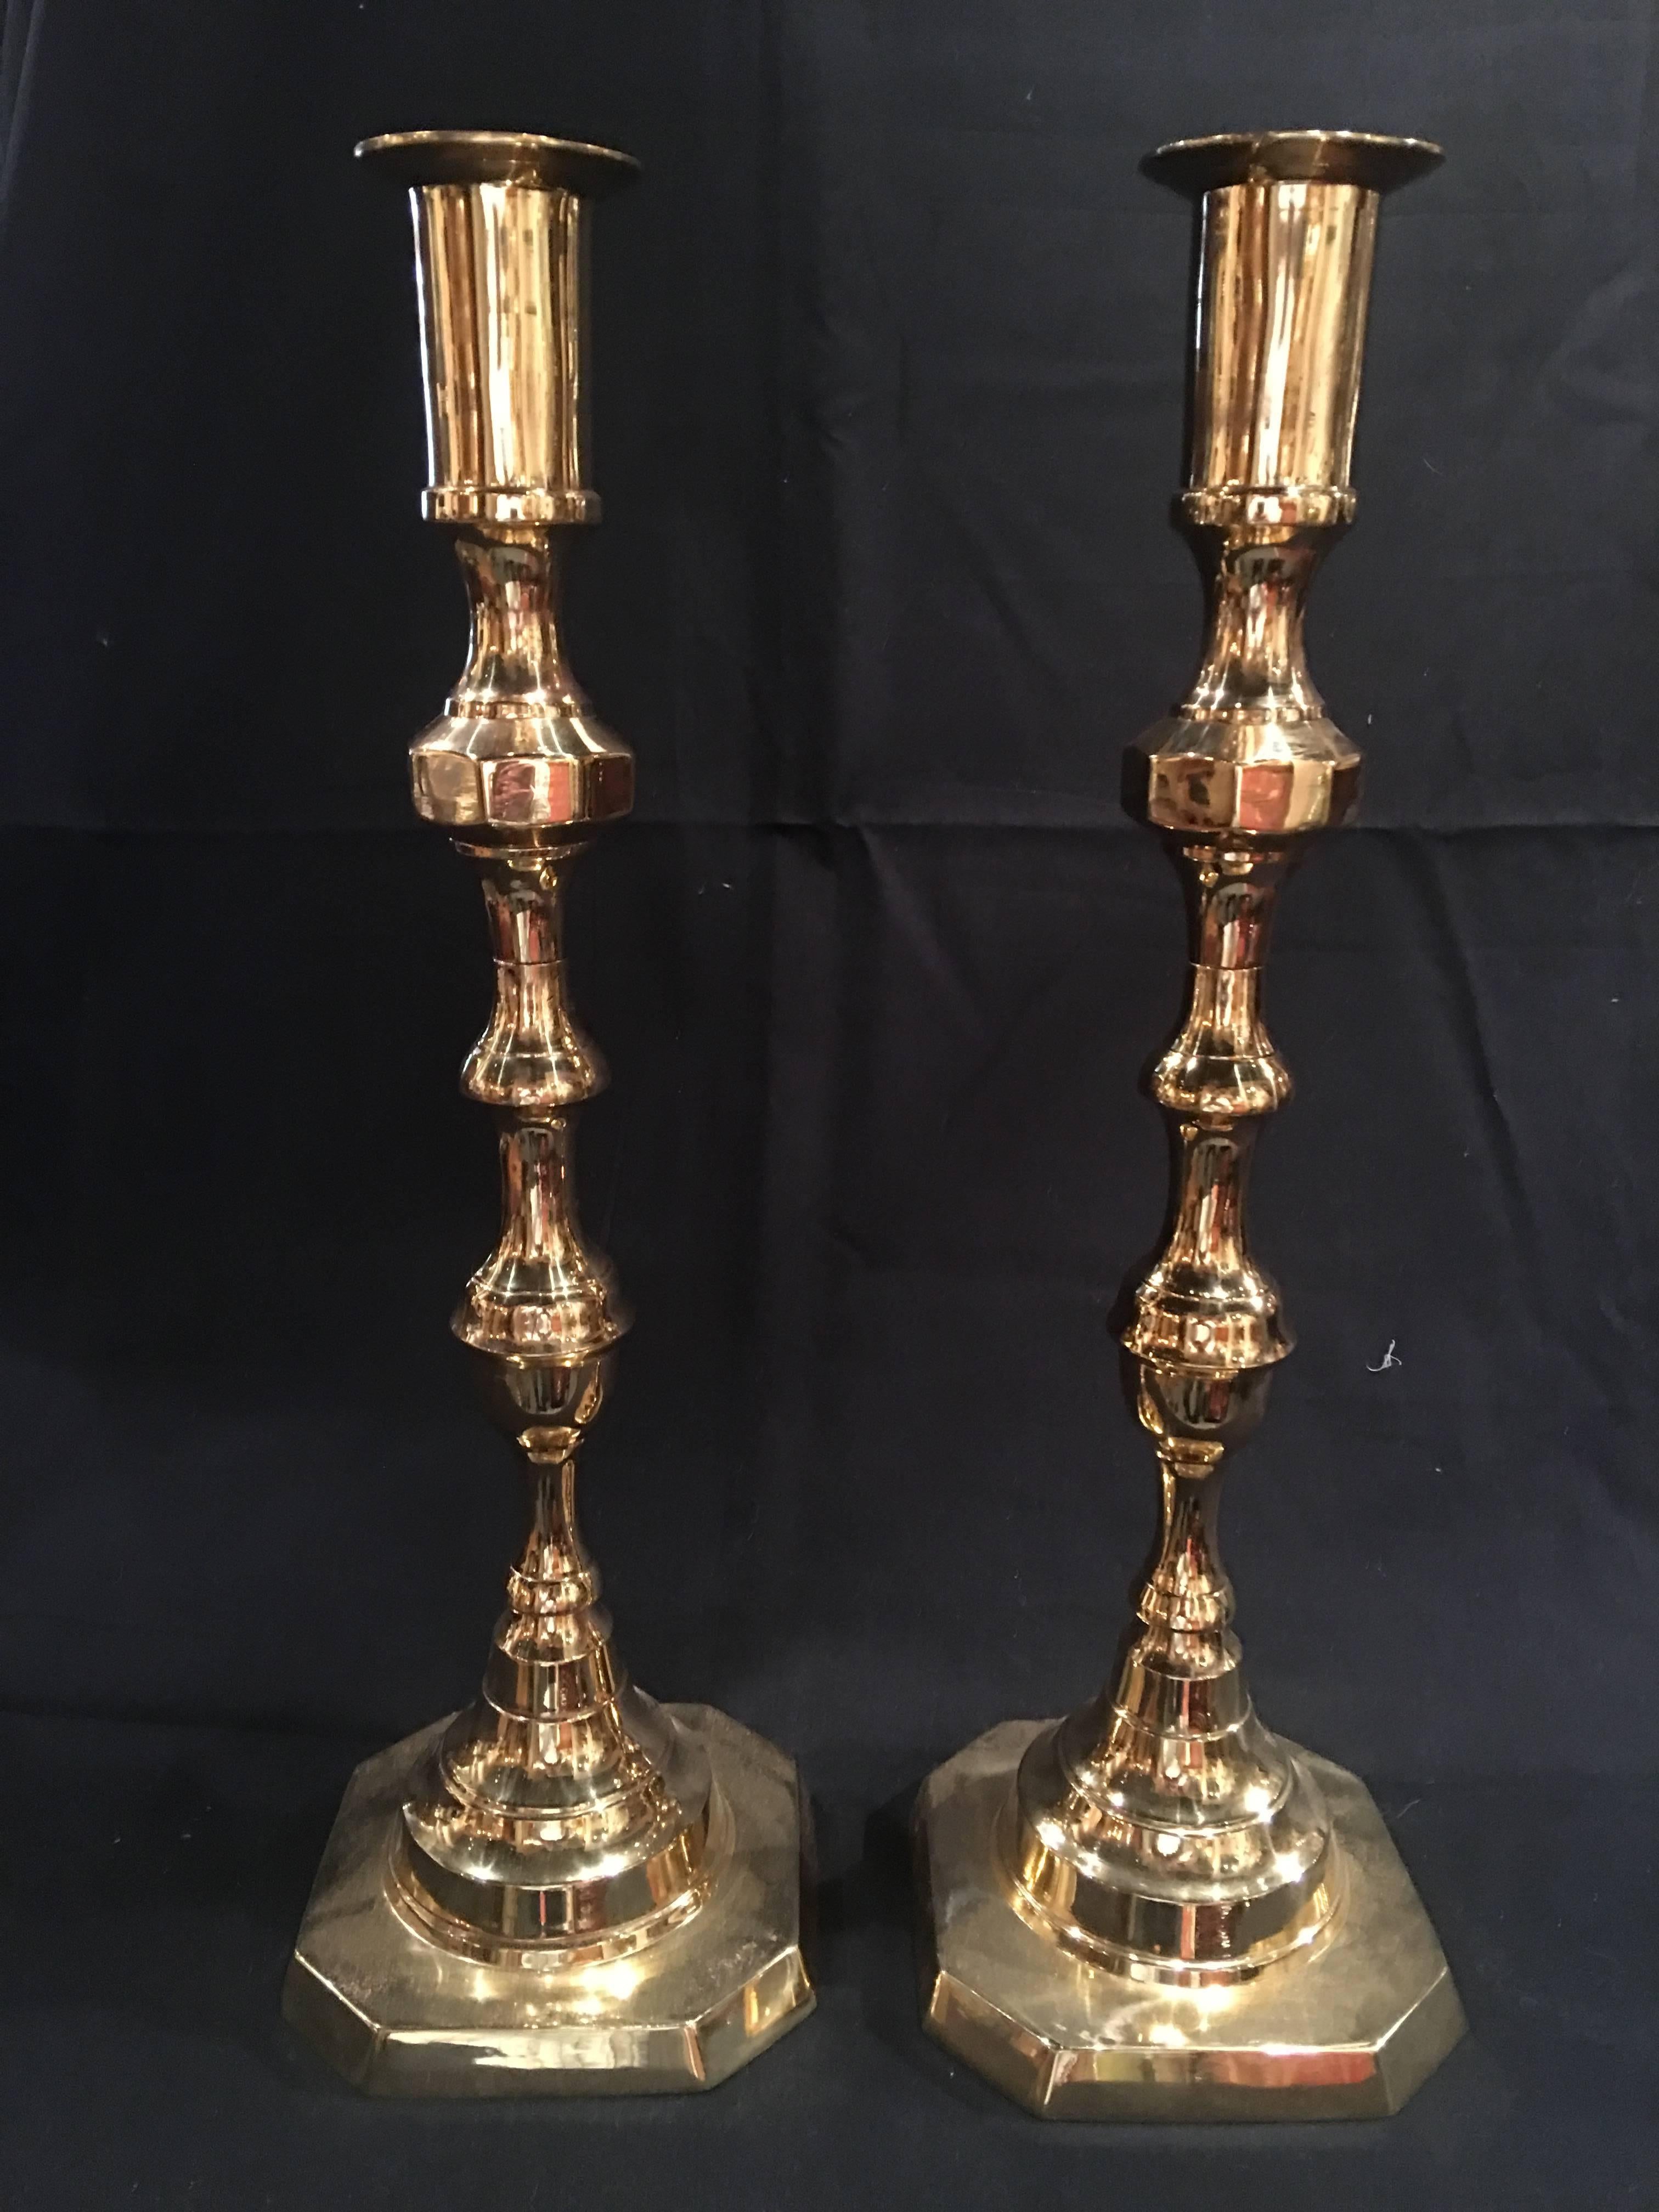 Pair of tall English polished brass candlesticks, 19th century.